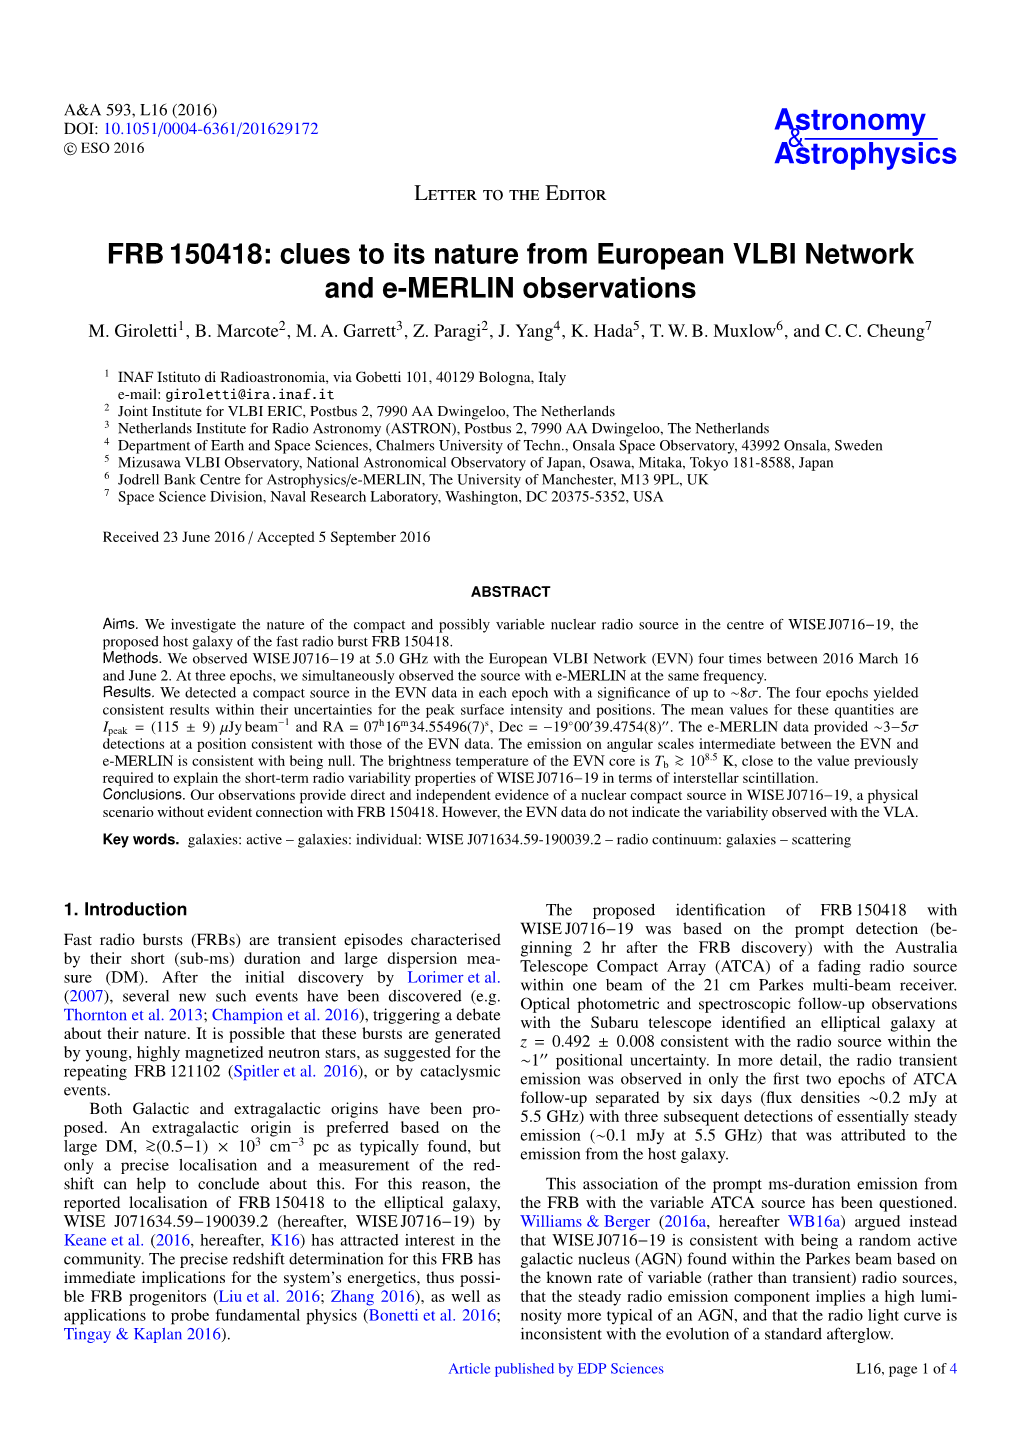 FRB 150418: Clues to Its Nature from European VLBI Network and E-MERLIN Observations M